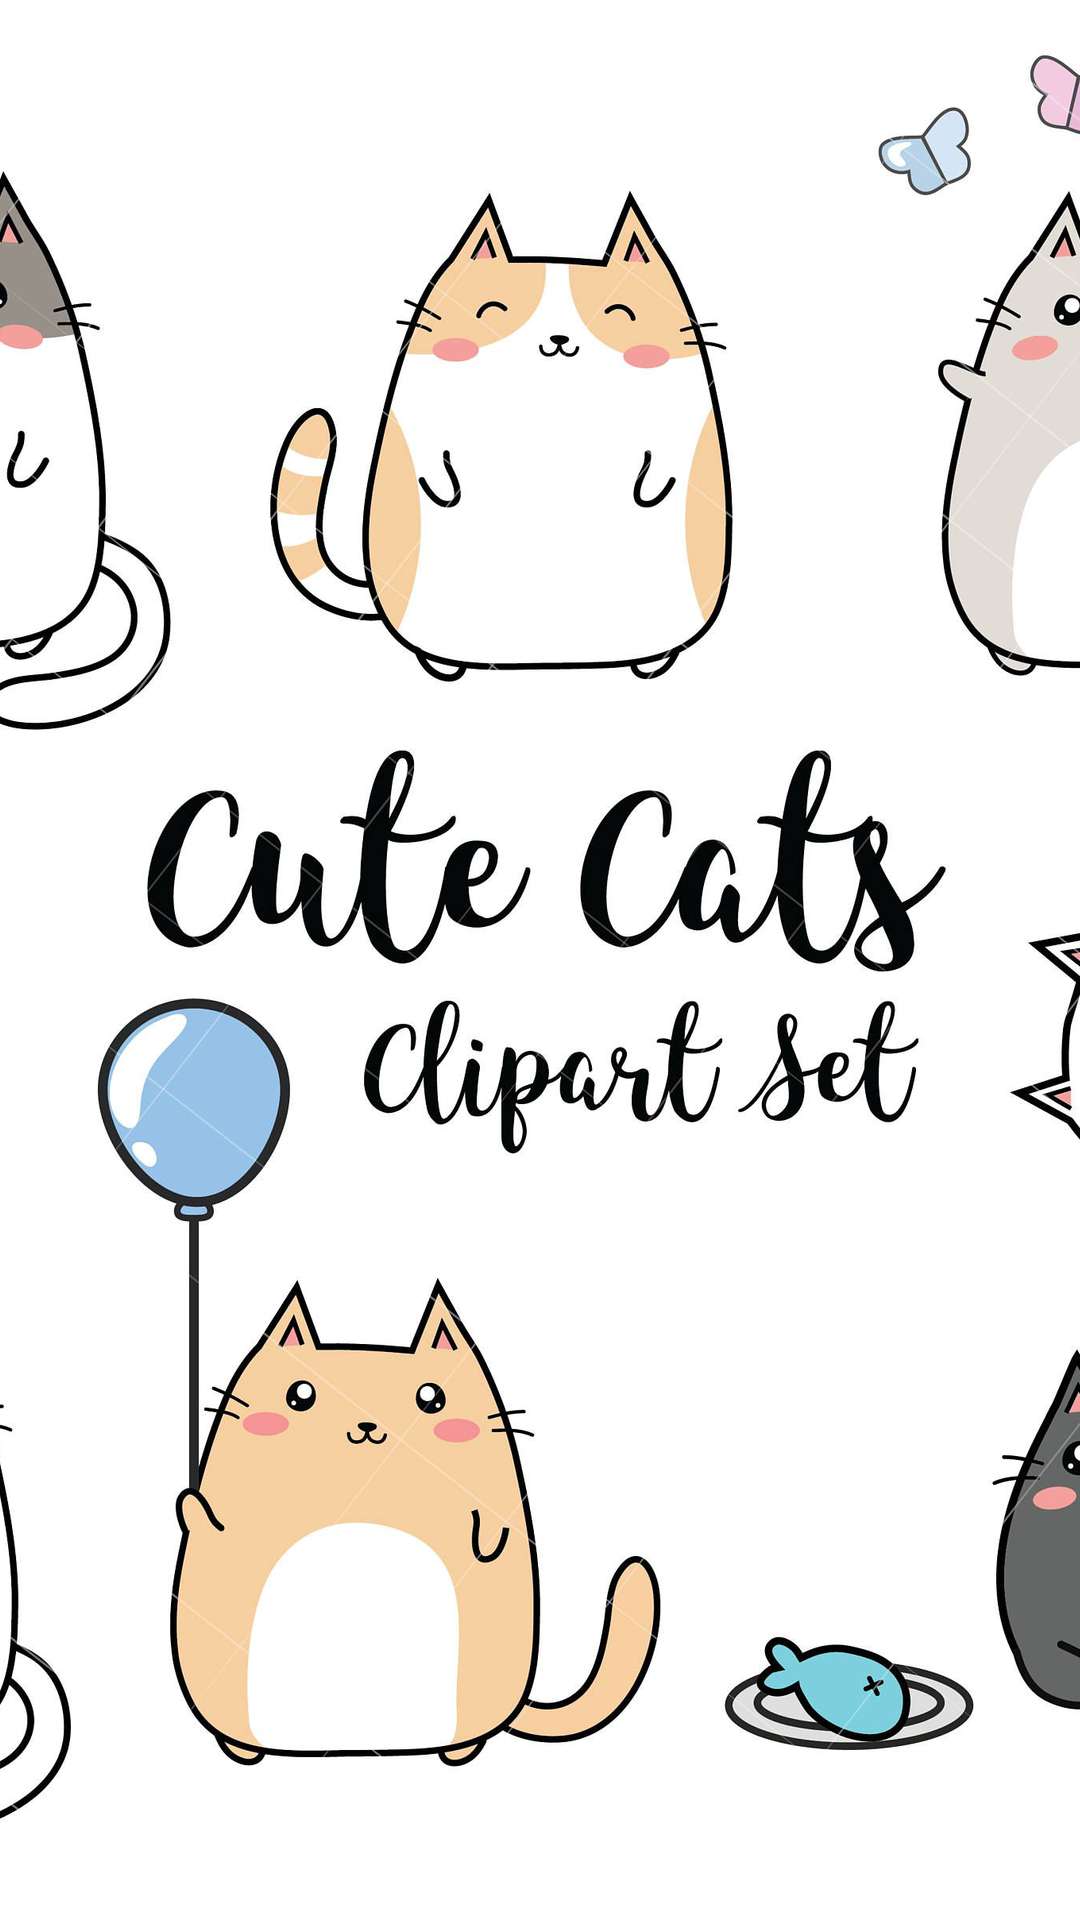 Chibi Cat Vector Images over 380